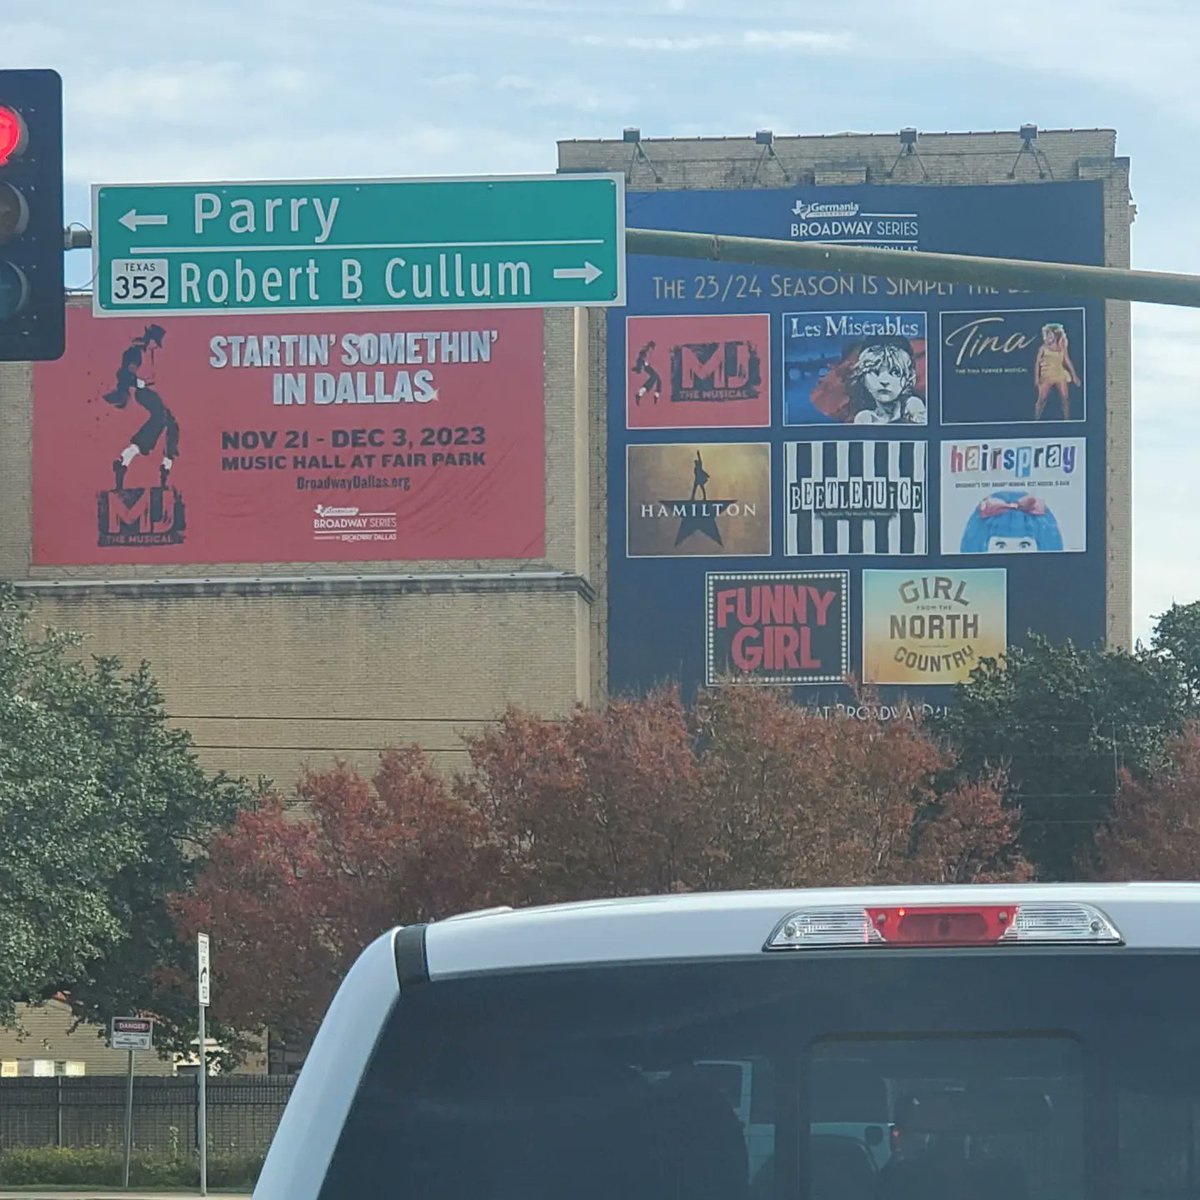 So geeeked! We made it to Dallas for #MJtheMusicalTour, we even met some new MJ fam along the way too! It was a FANTASTIC show! MJ fans and general Broadway fans alike LOVED IT!!!😍🥰❤🙌🏾
#MJtheMusicalTour #DallasTX #Broadway #Live #FiveStars #TheGreatestShowOnEarth